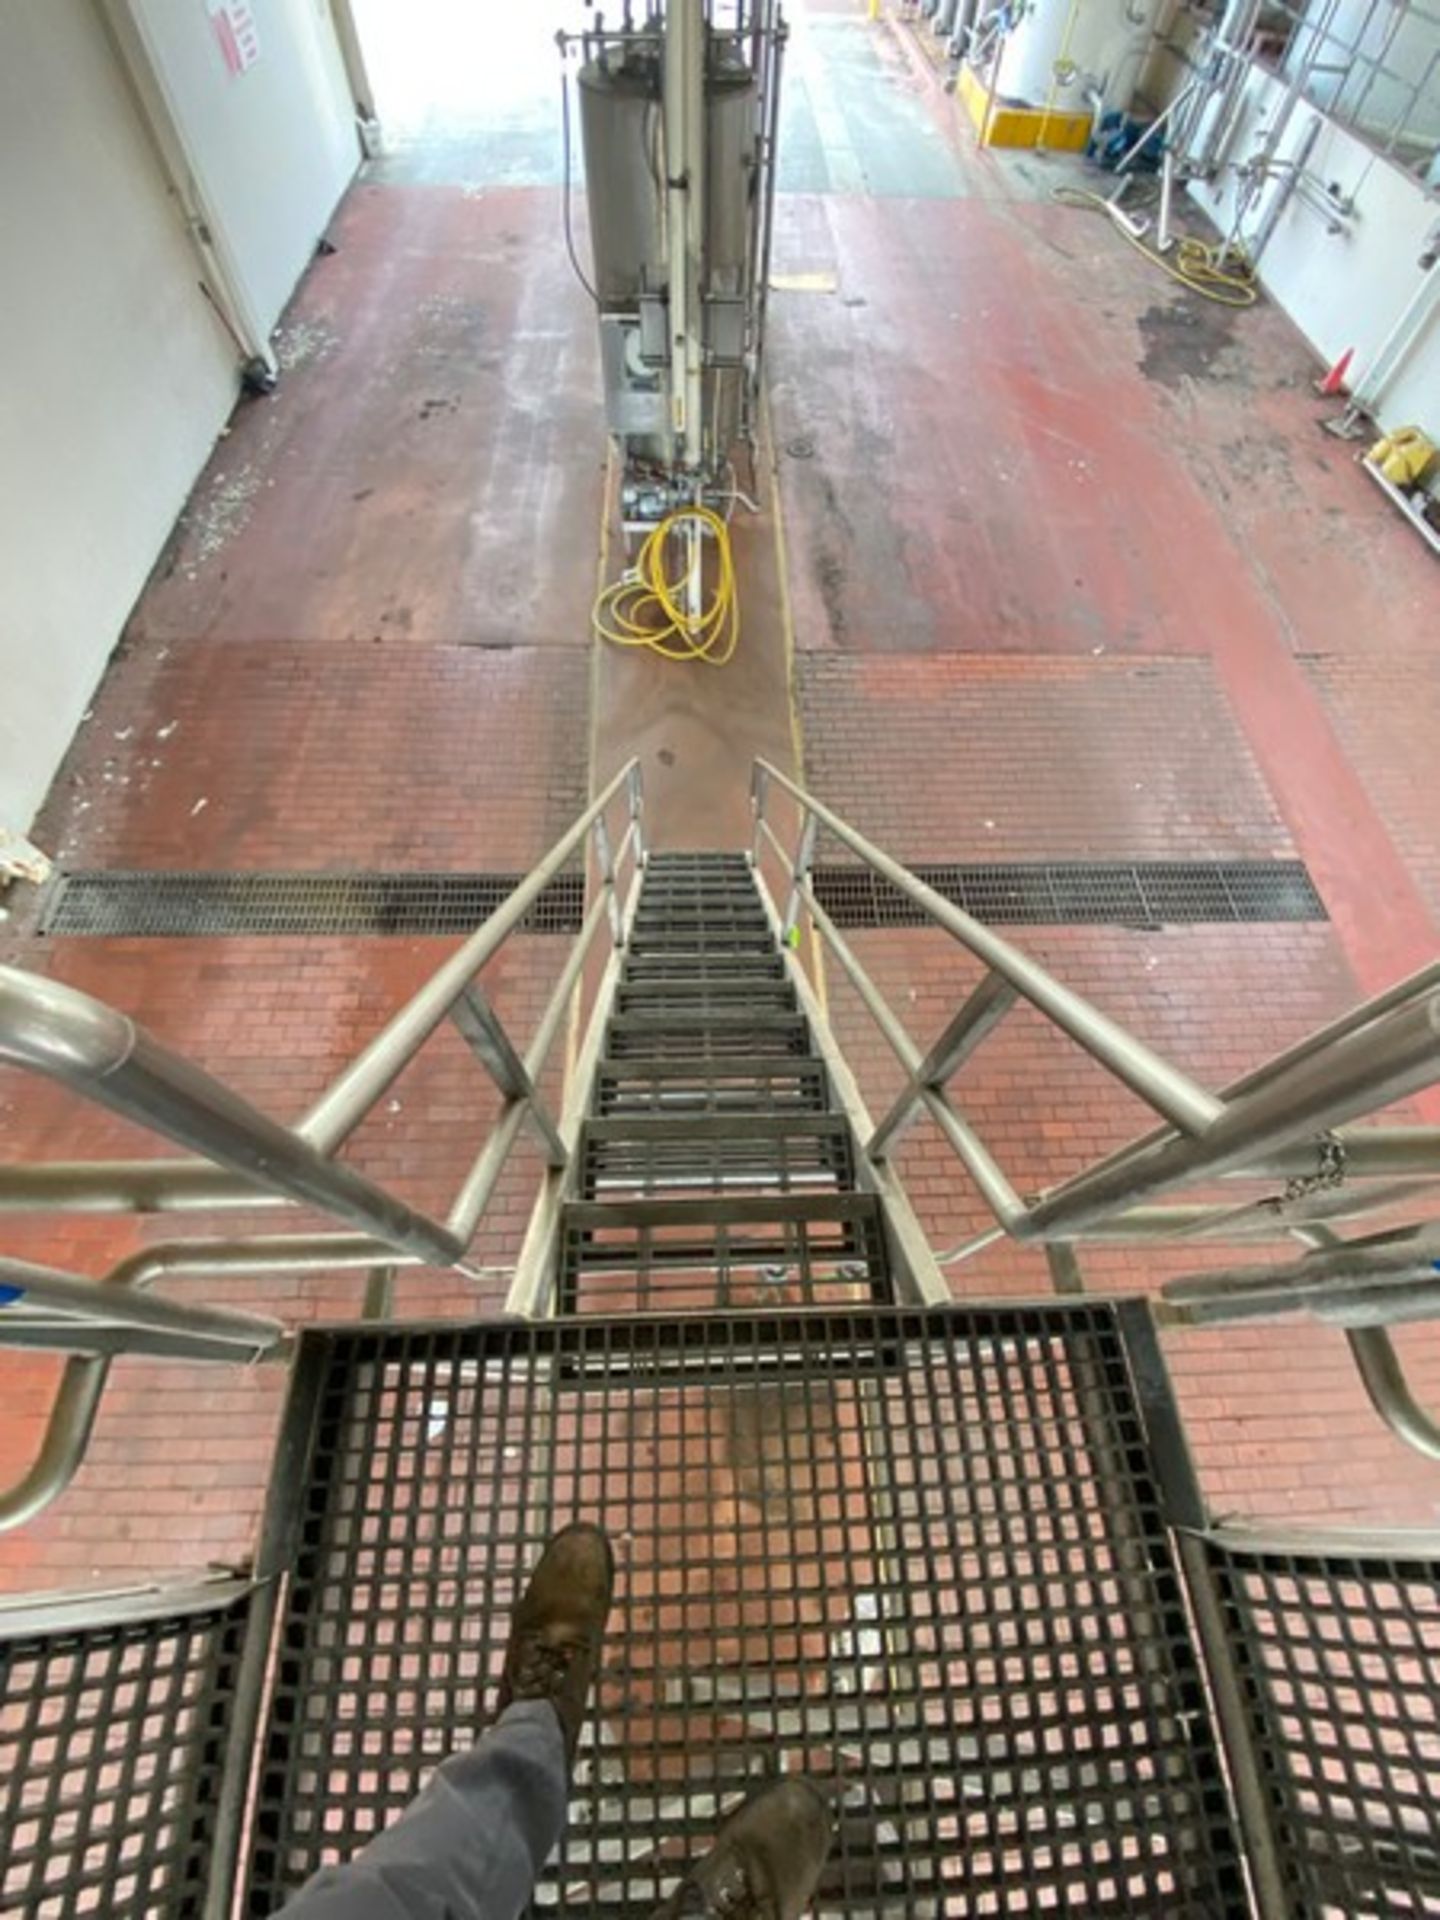 2-Deck S/S Tanker Platform, with Decking, Handrails, & Stairs (LOCATED IN LOS ANGELES, CA) (RIGGING, - Image 8 of 8